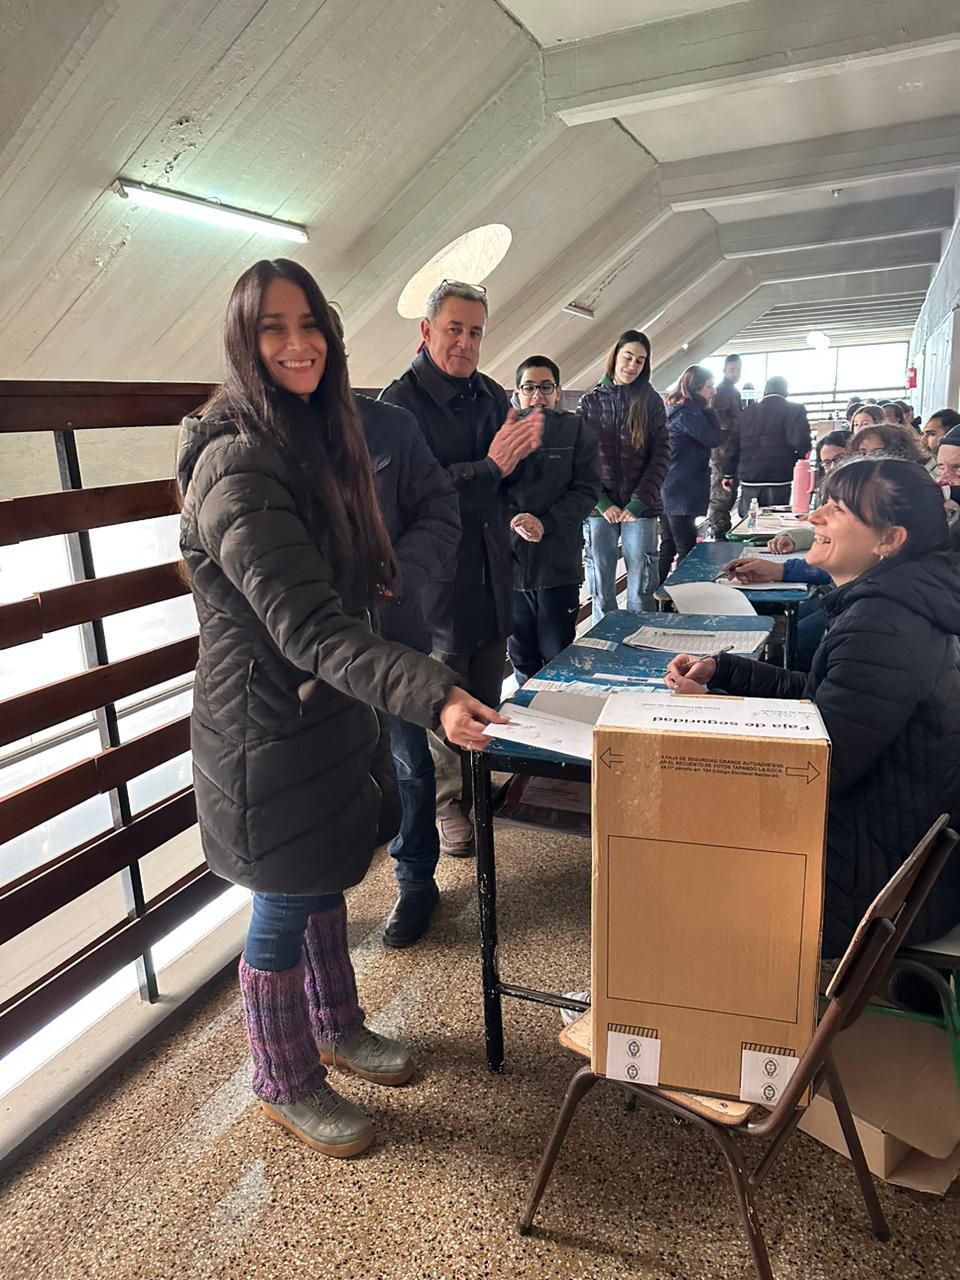 Evangelina Carrozo cast her vote, although she is also a protagonist: she is running for councilor in Gualeguaychú (Photo: Teleshow)